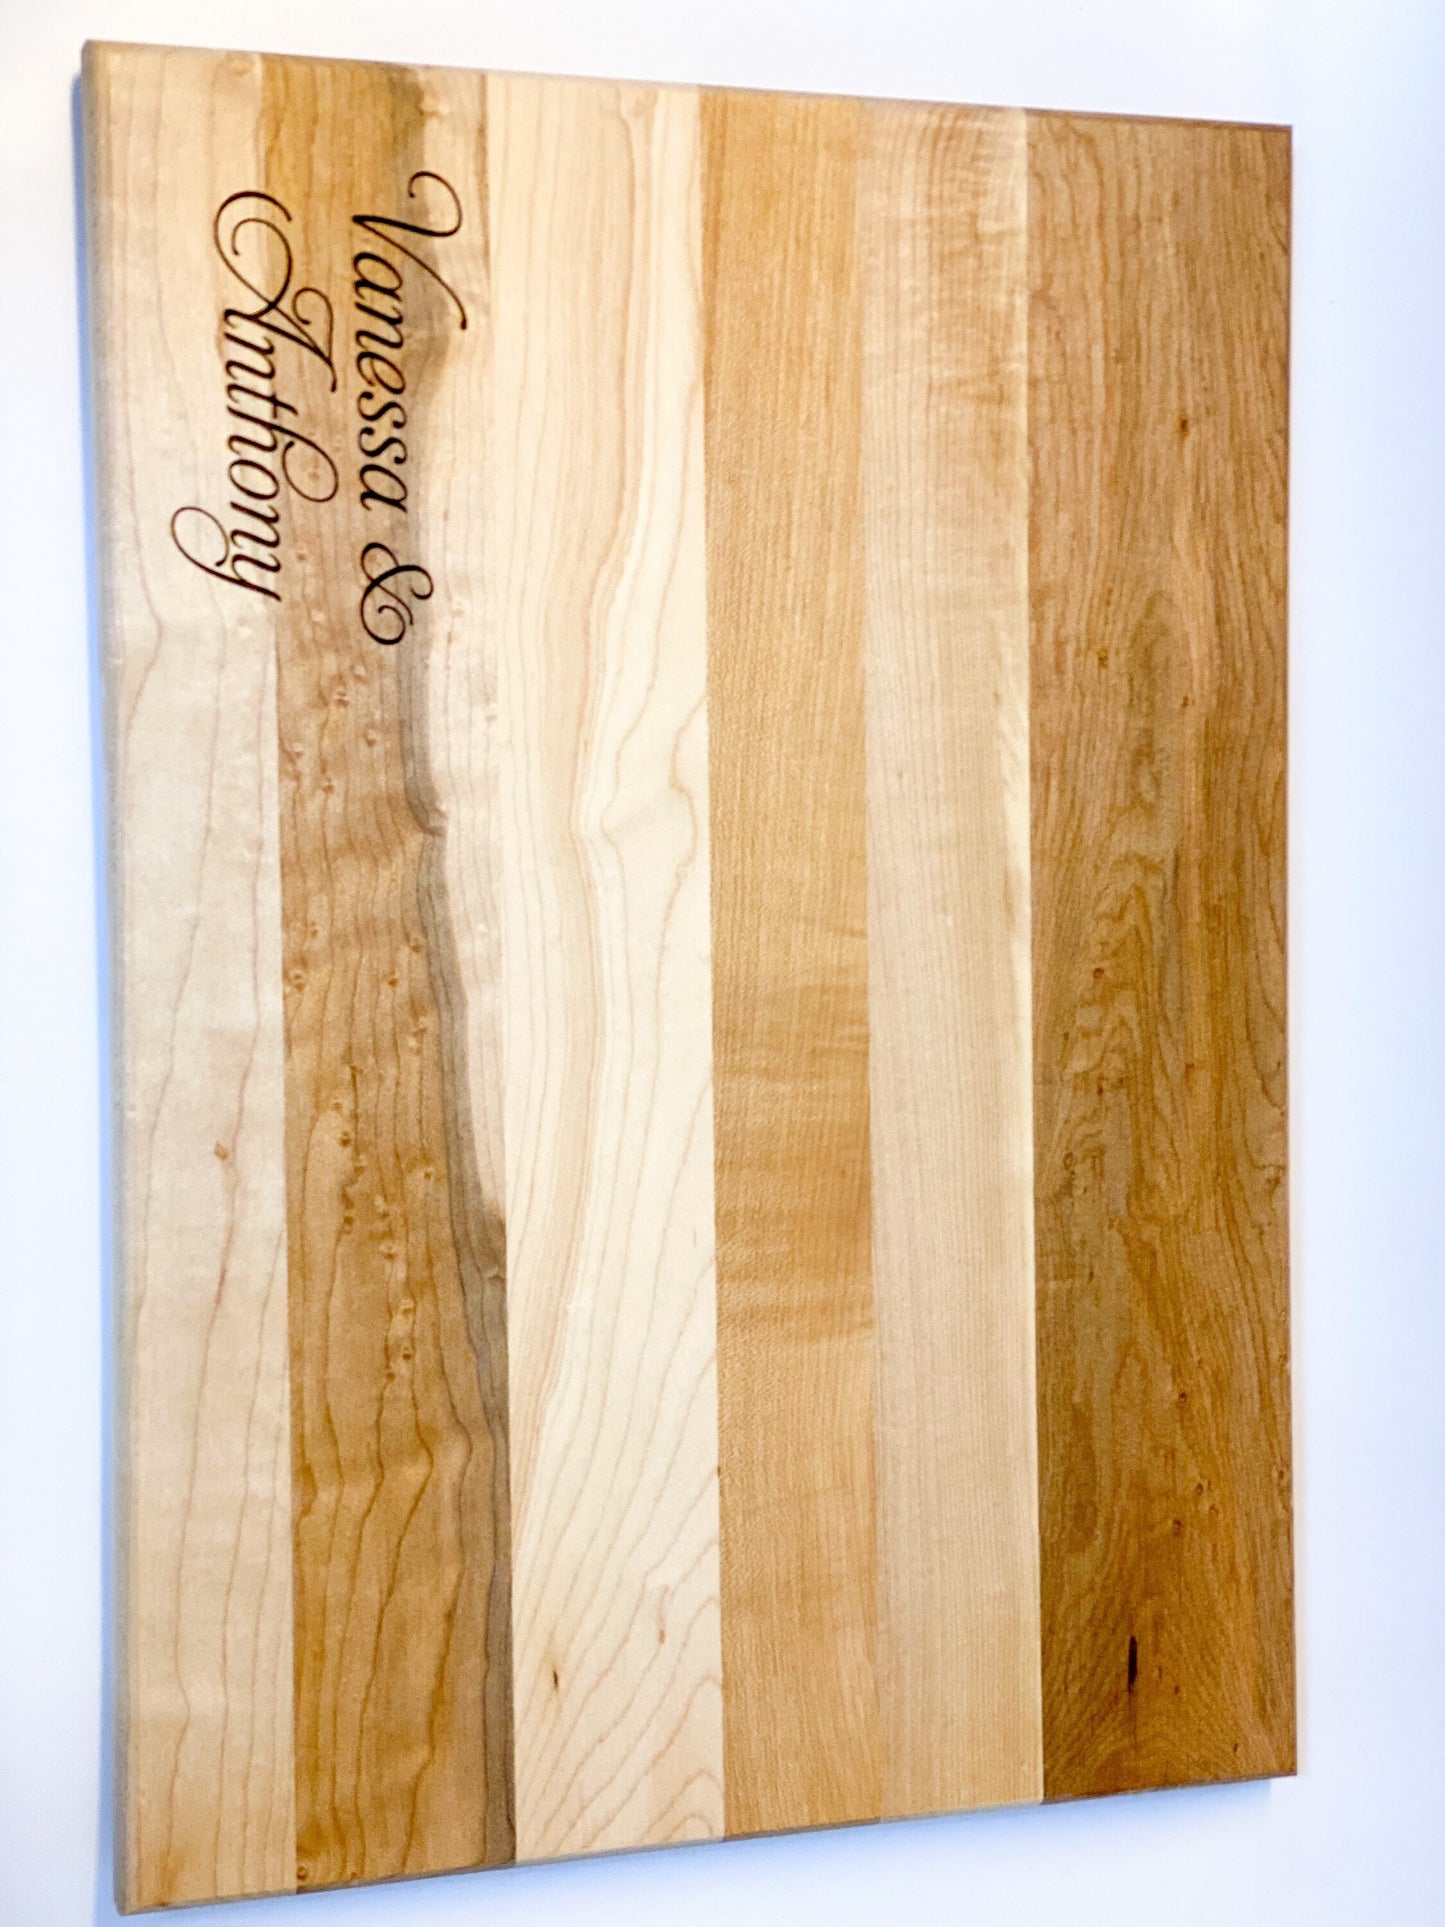 Maple board with engraving